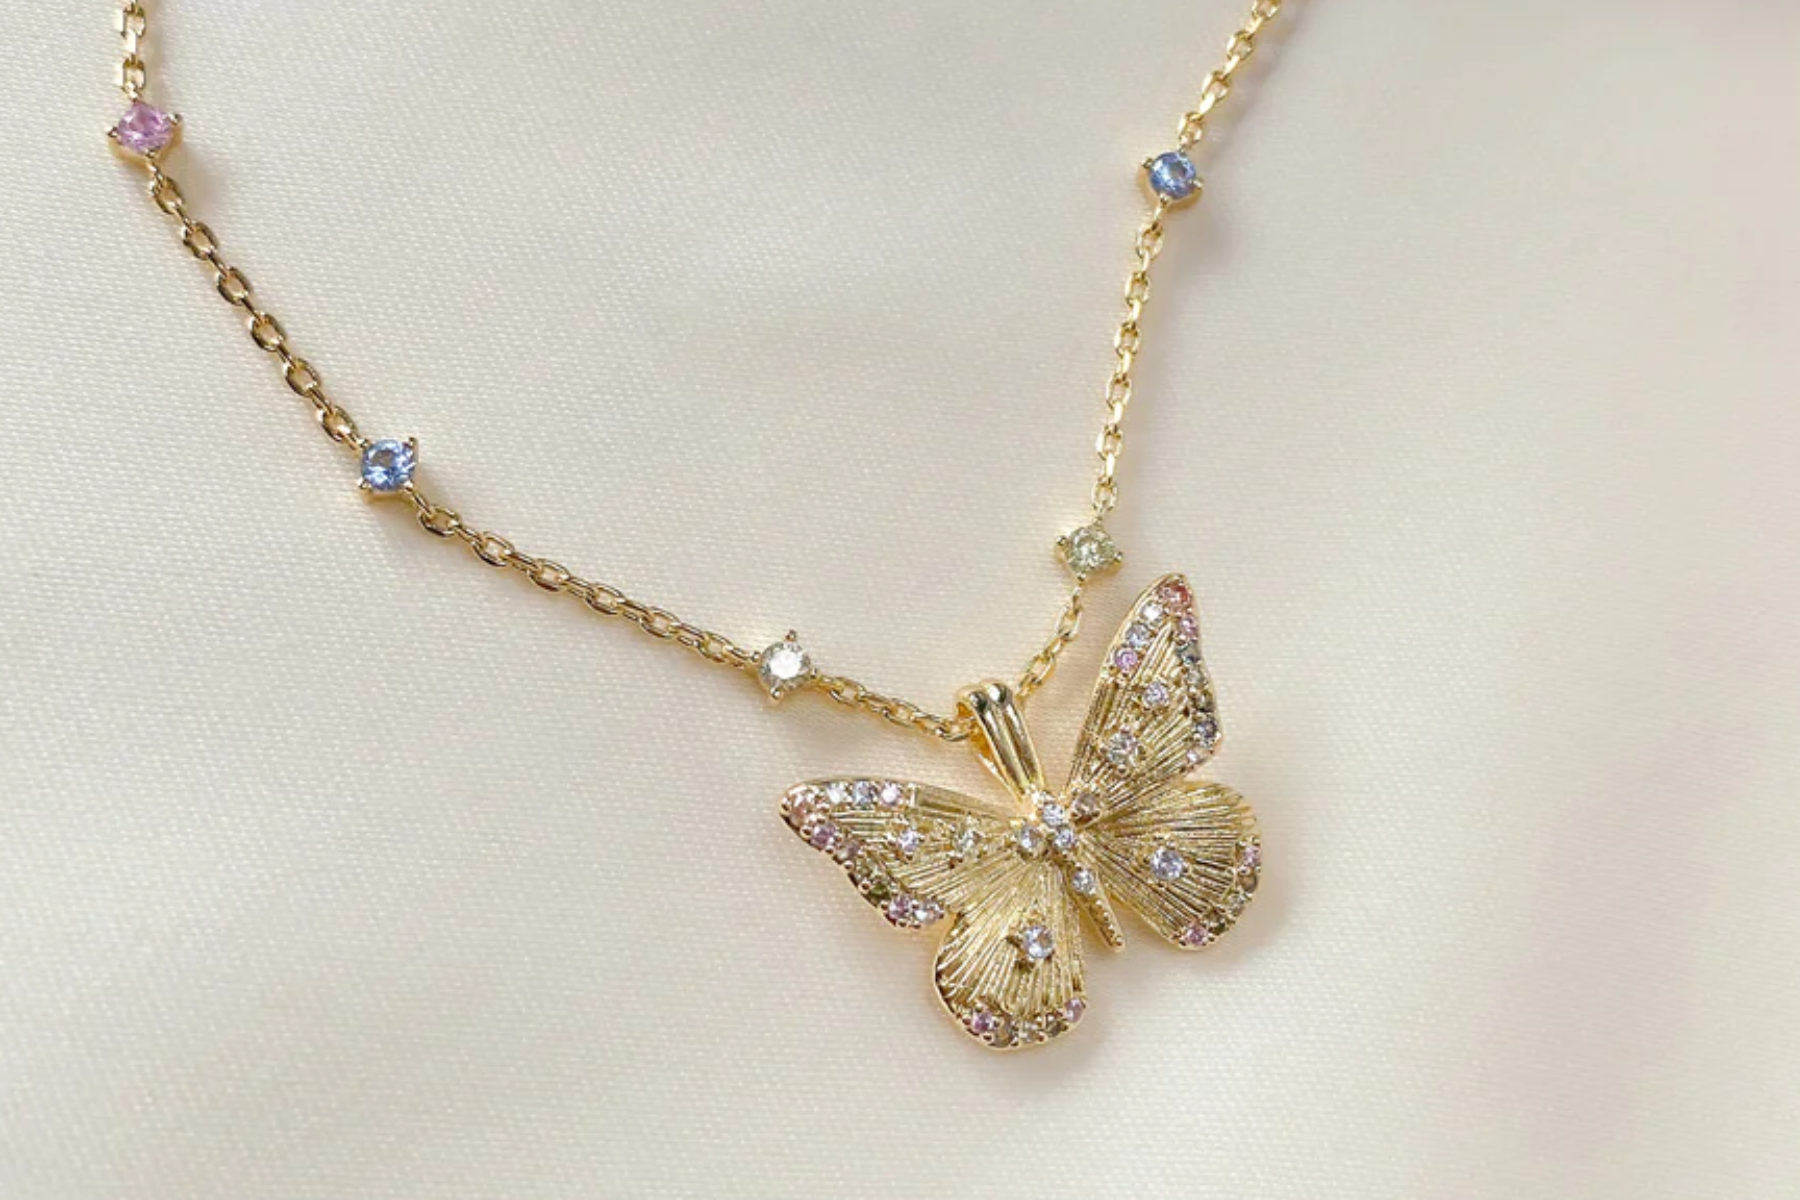 A gold butterfly necklace set with various gemstones